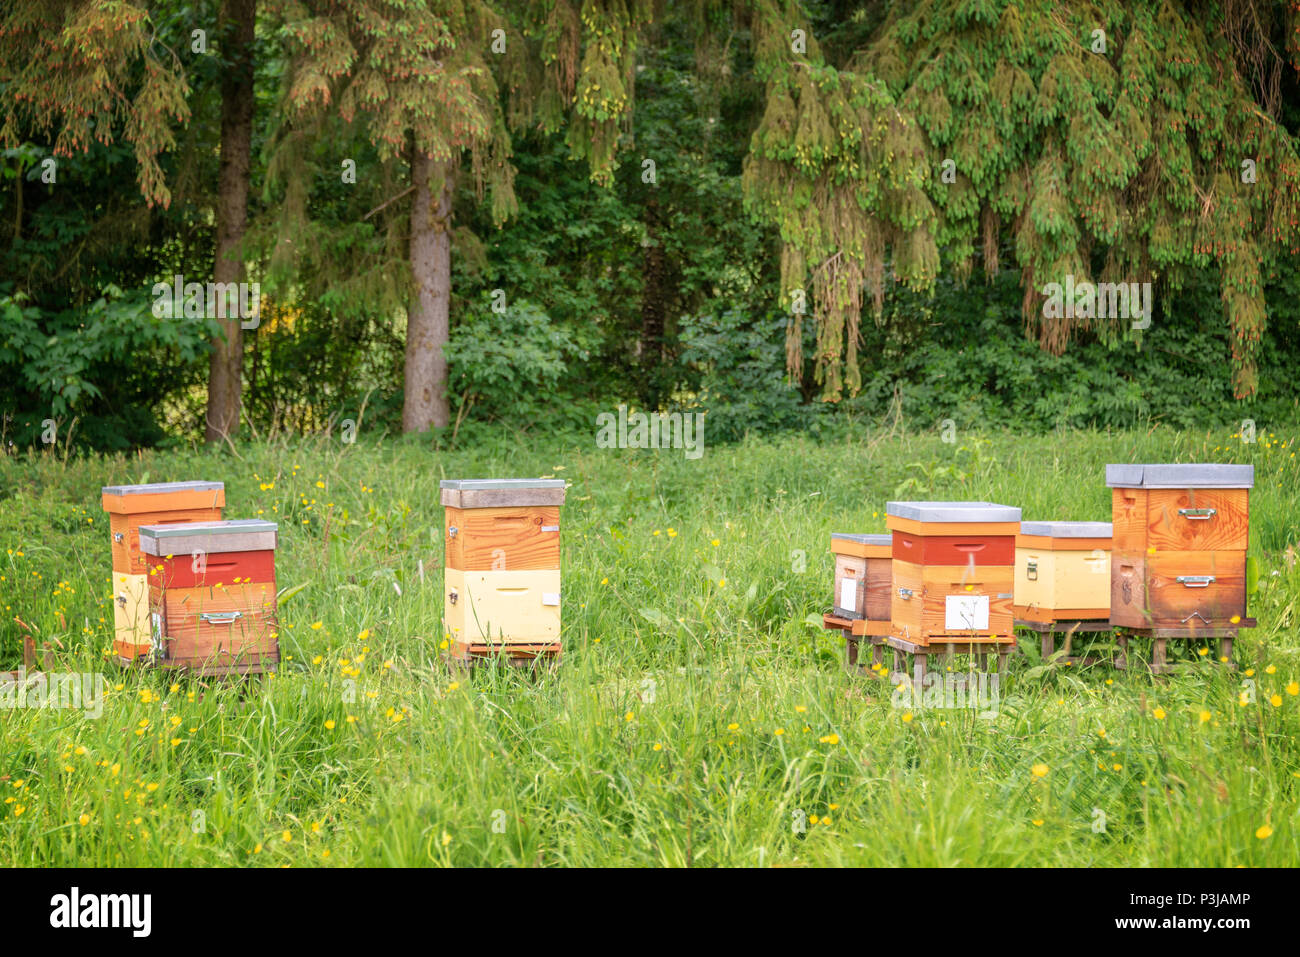 Beehives a green grassy field near a forest in France Stock Photo